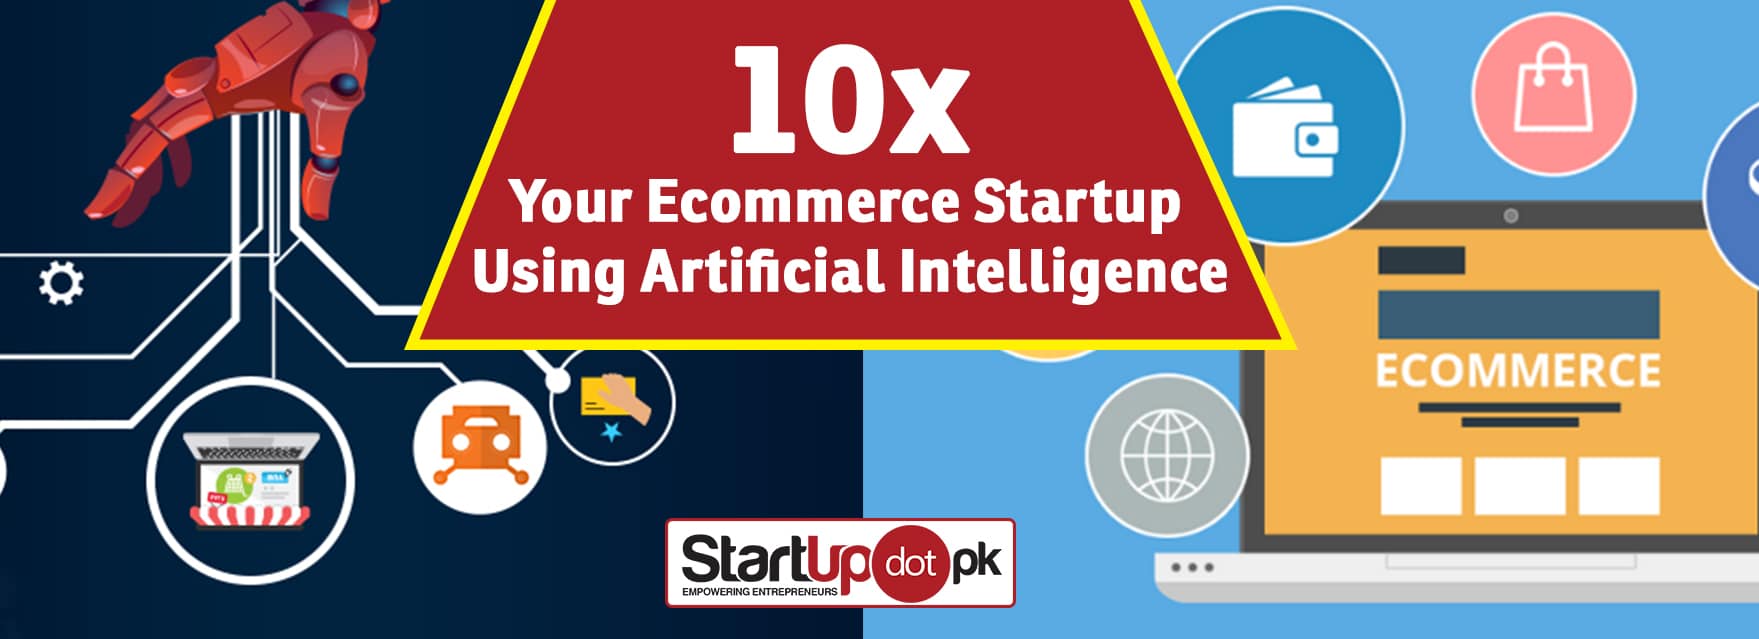 10x Your Ecommerce Startup